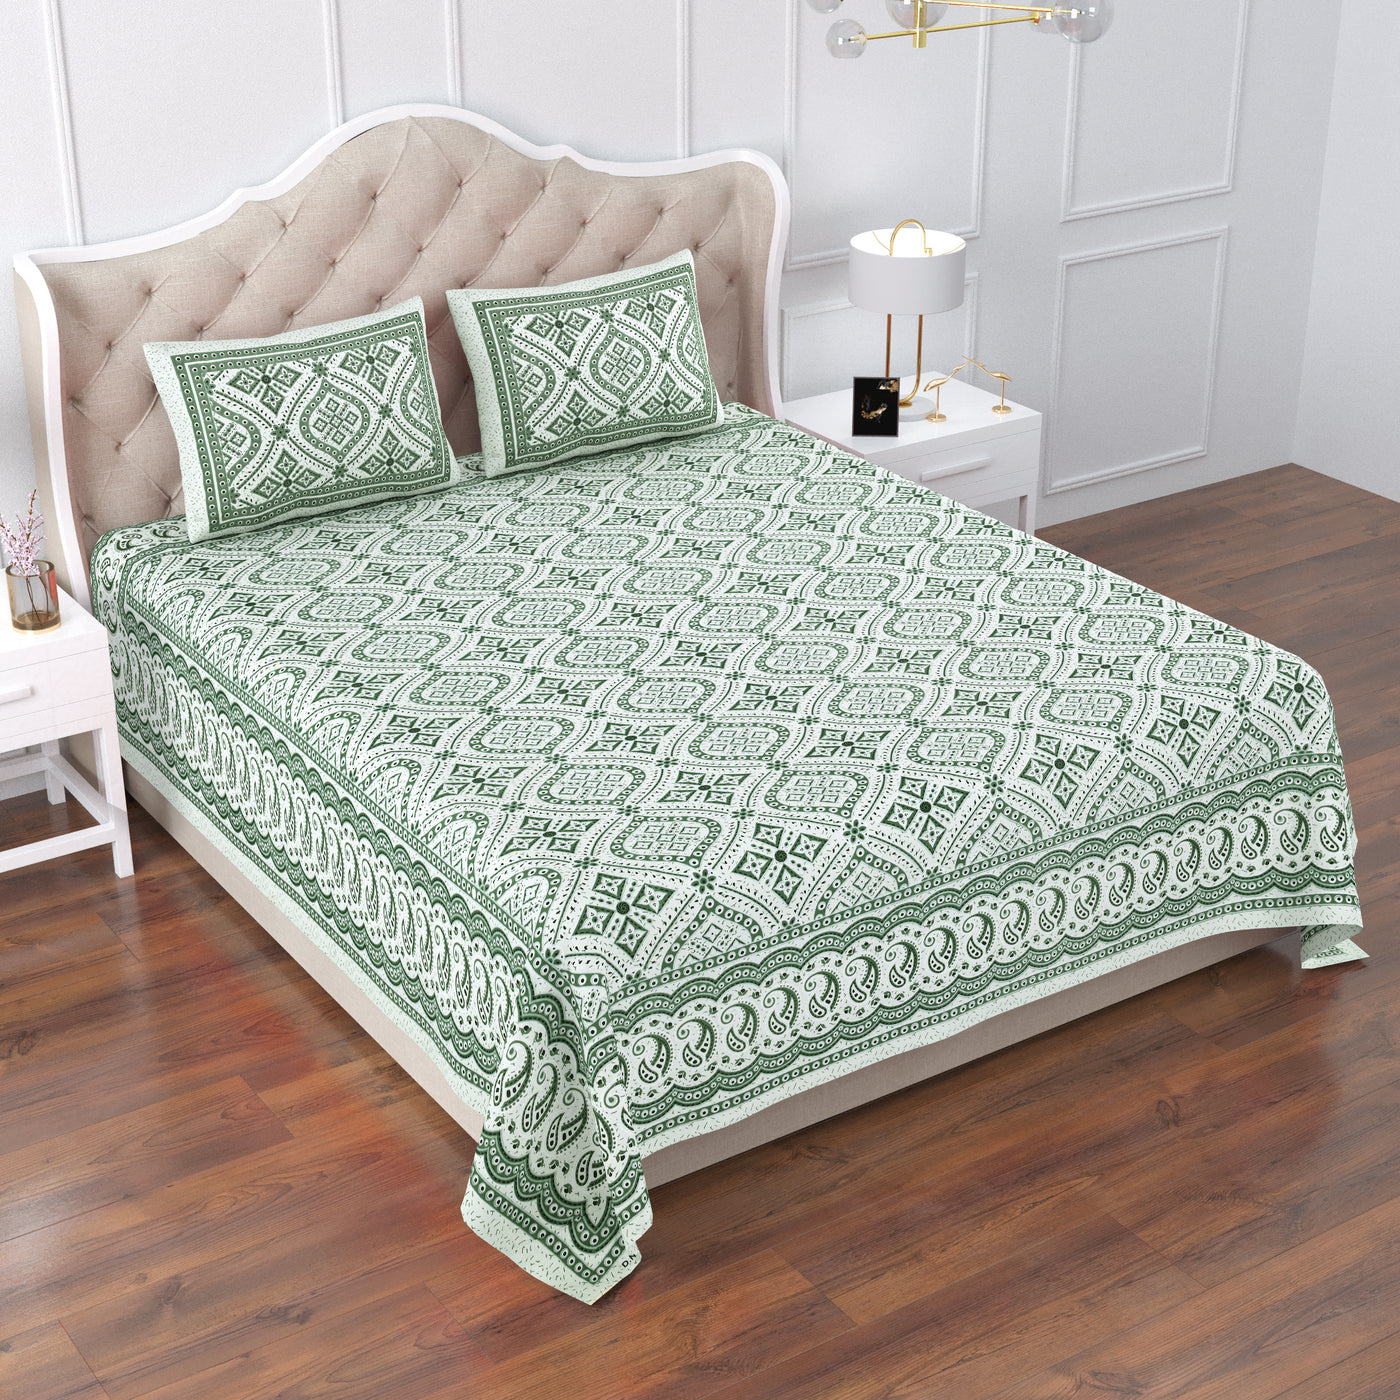 Greeny Grass Cotton Printed Double Bed Sheet With 2 Pillow Covers